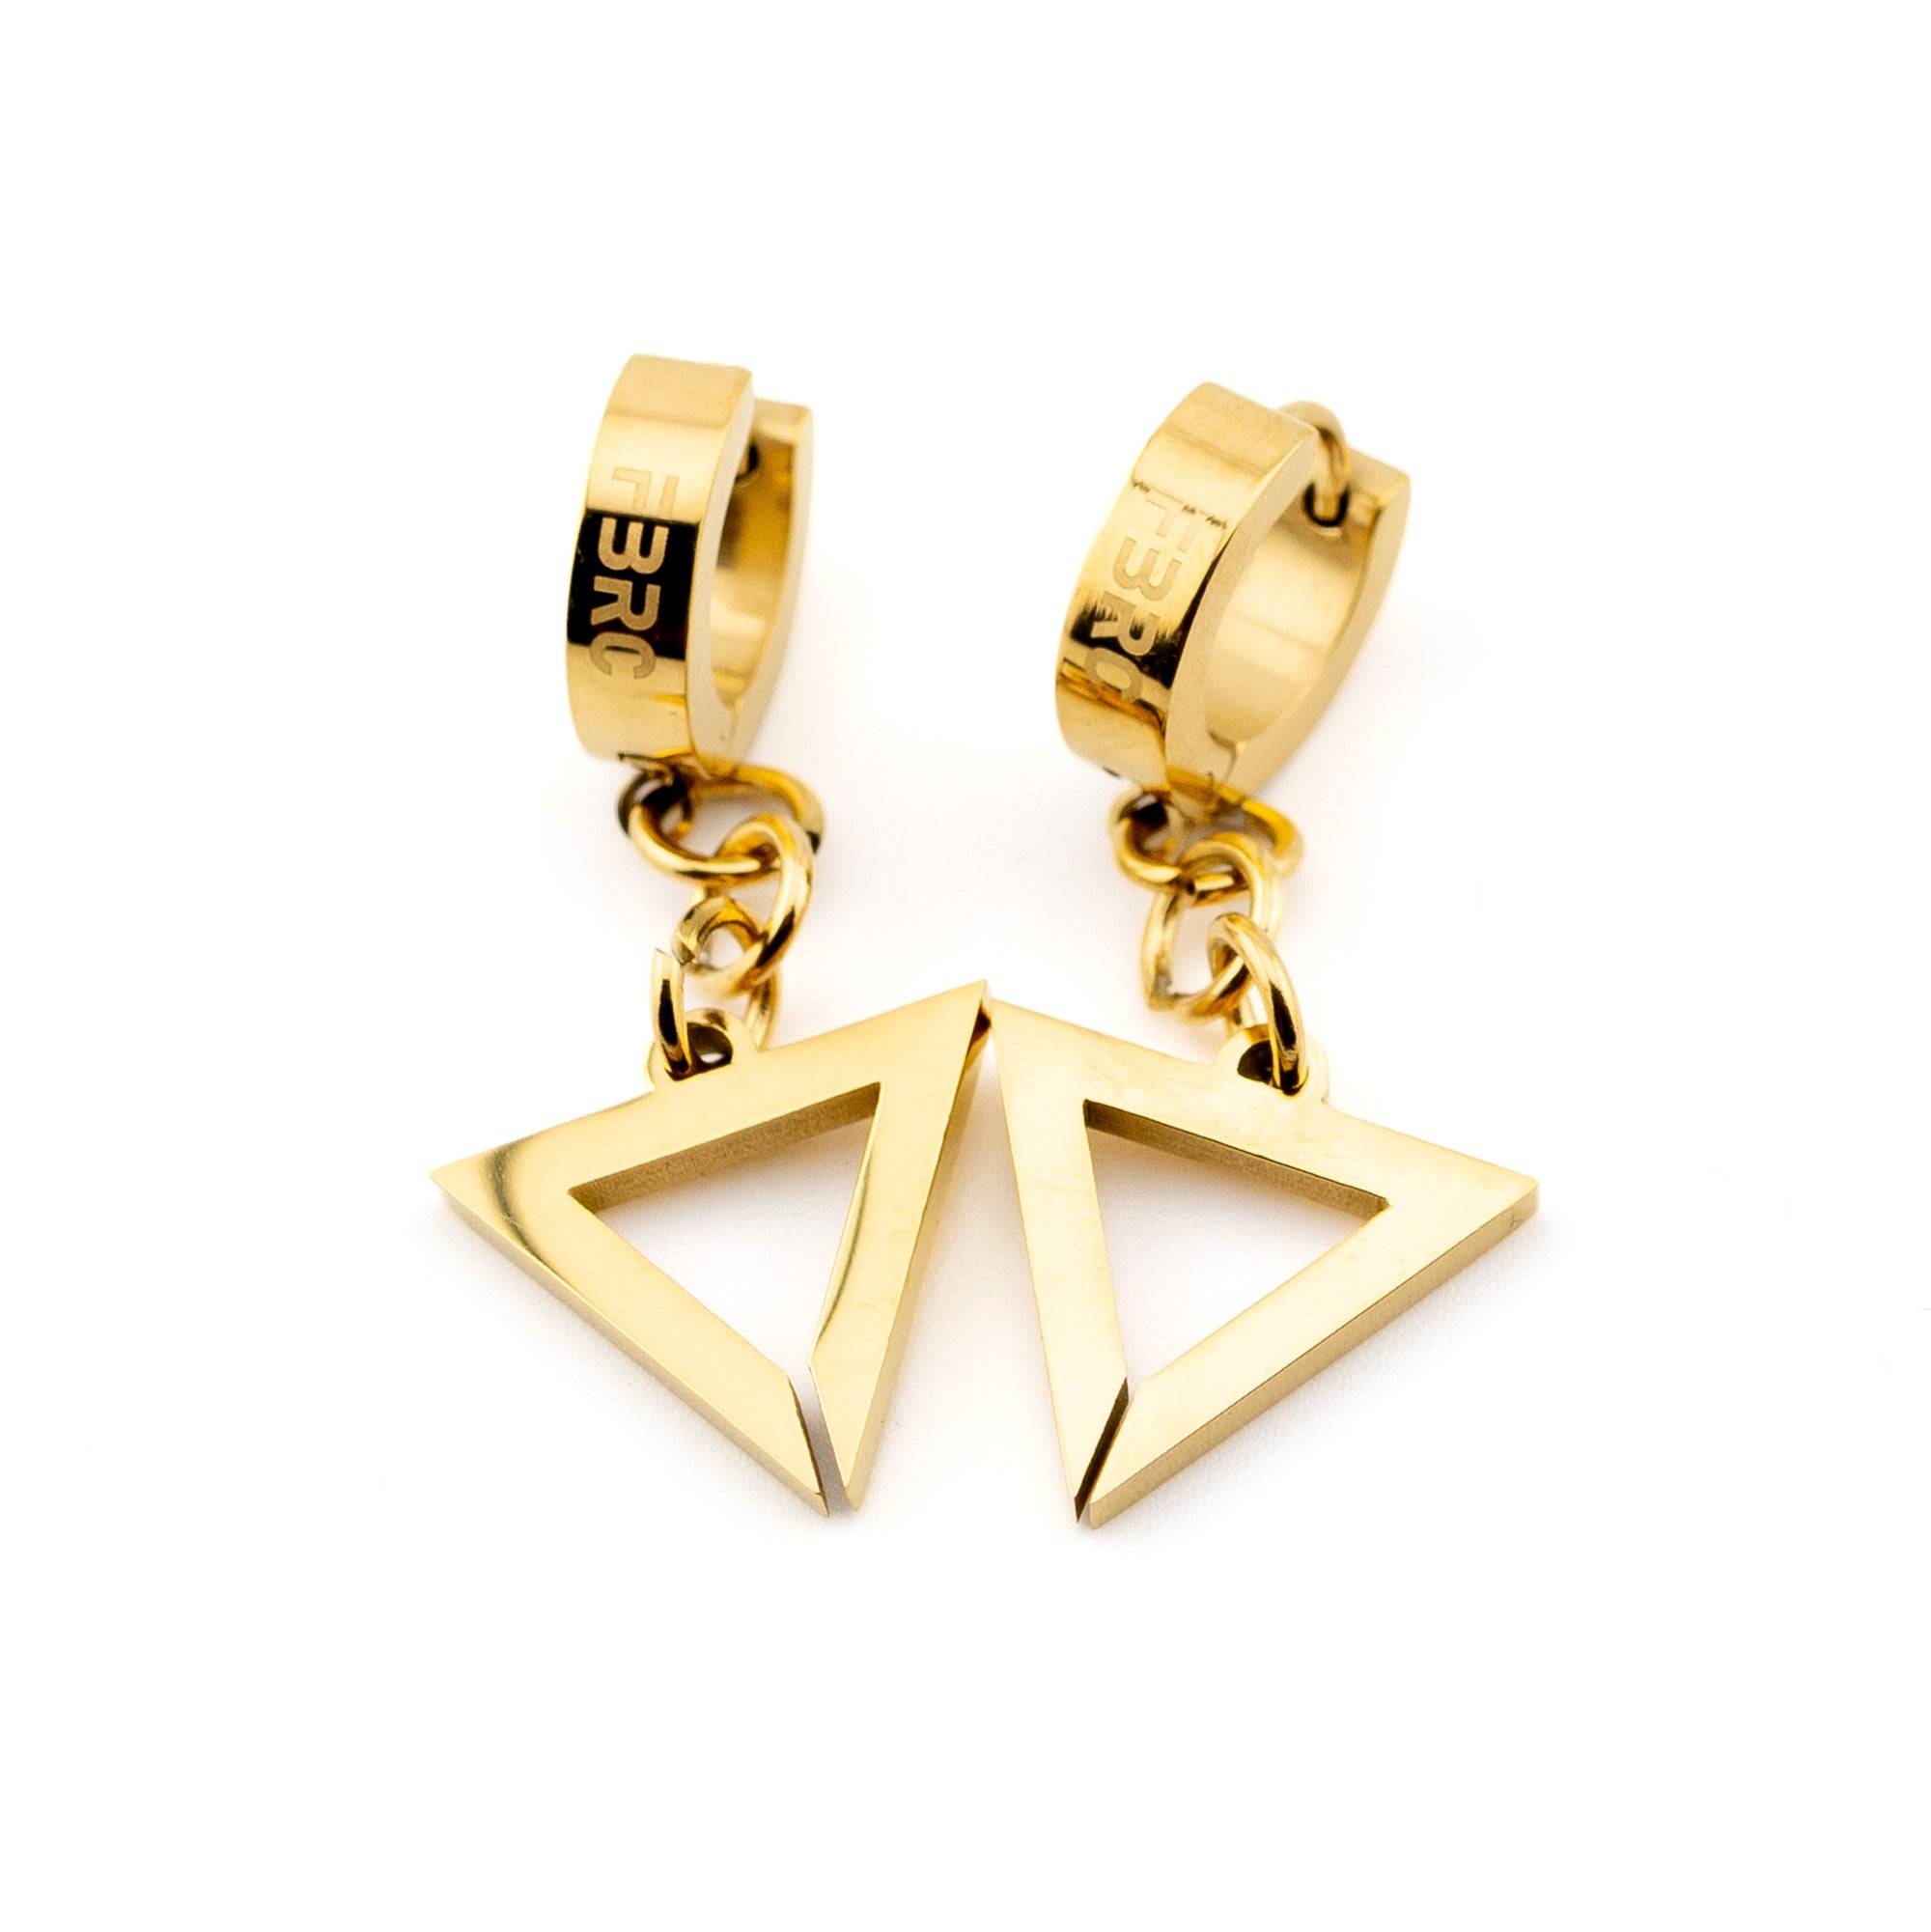 TR-08 Gold Triangle Earrings